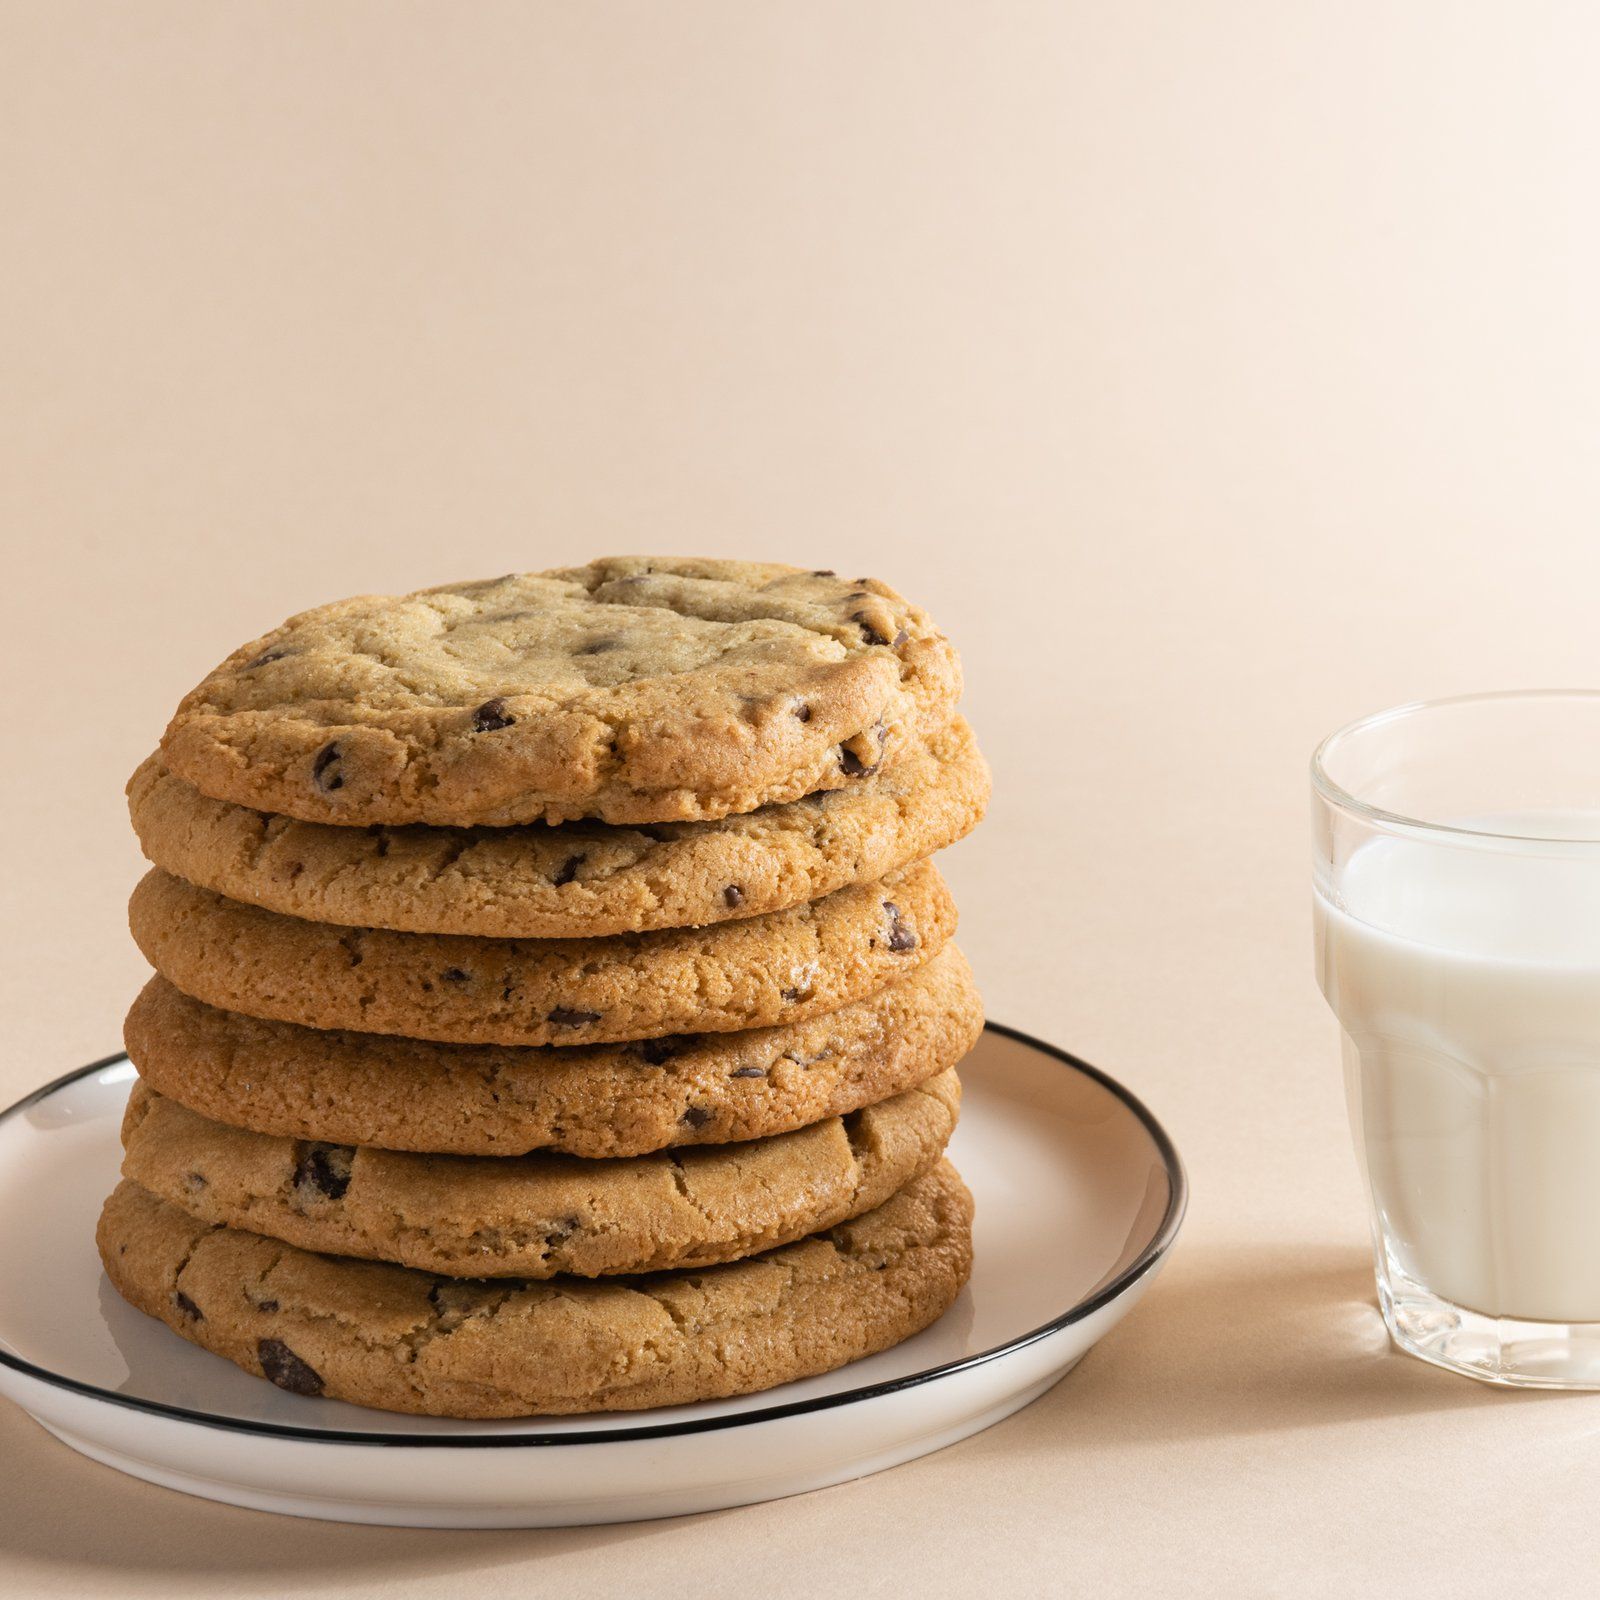 Silos Baking Co. Chocolate Chip Cookies